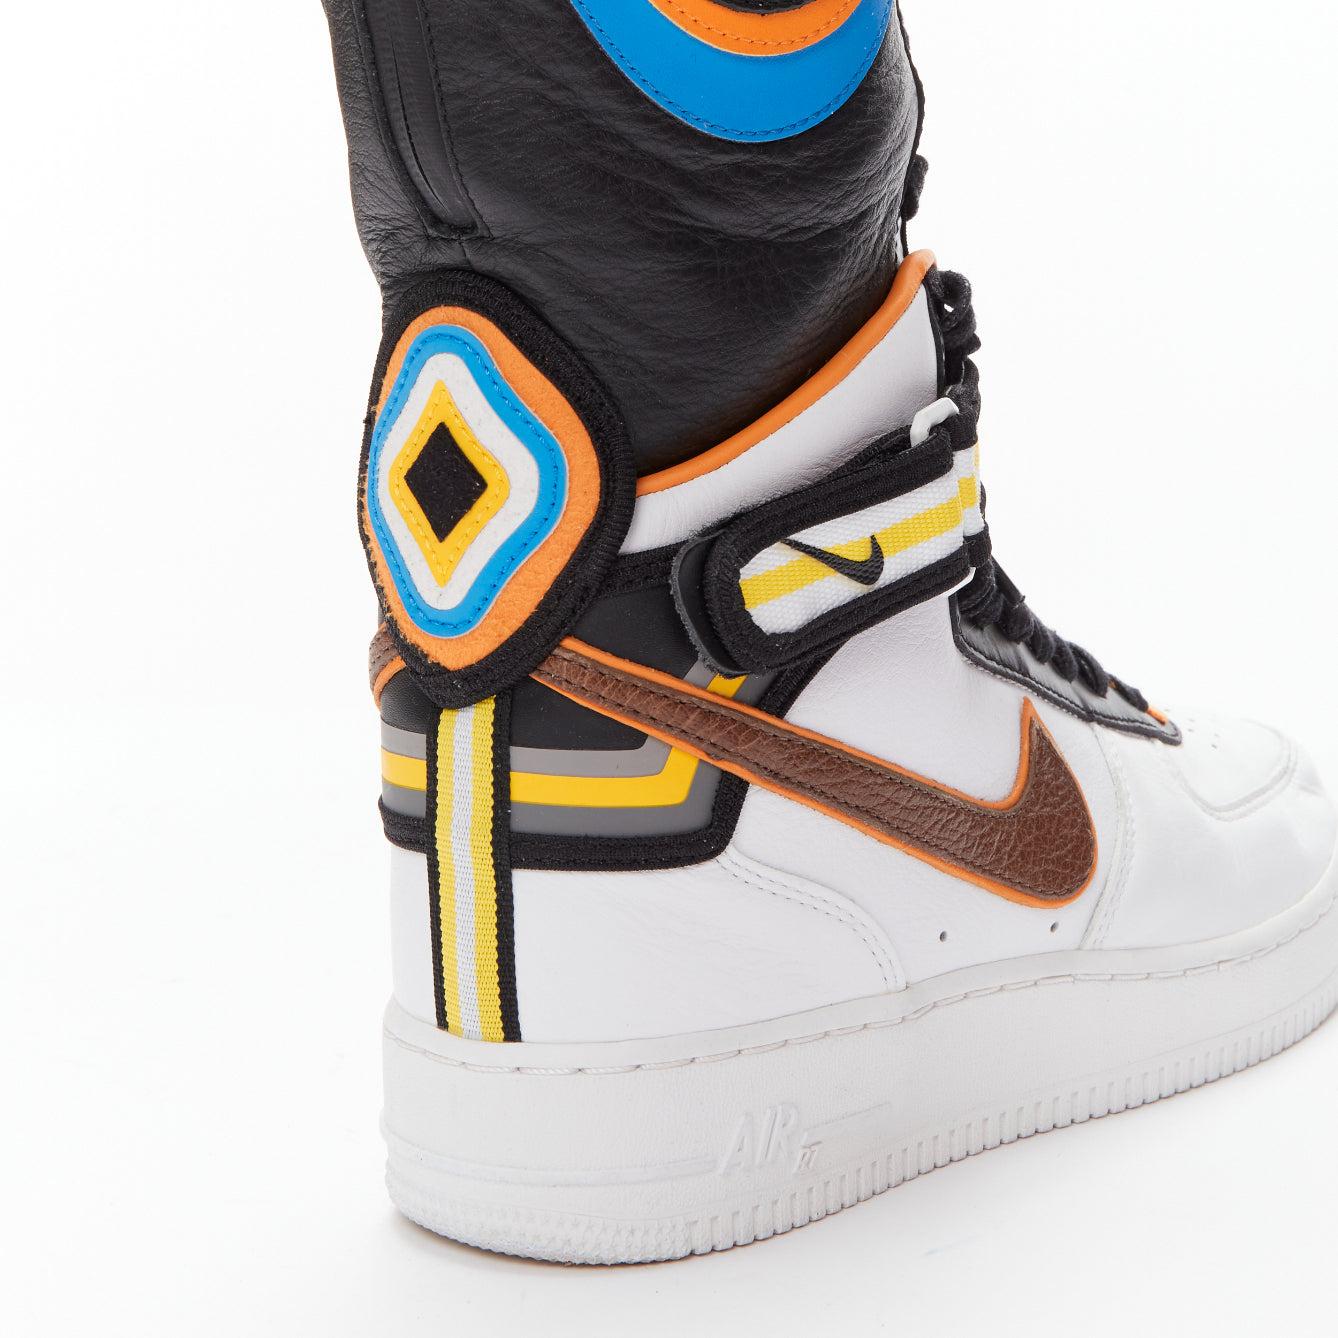 GIVENCHY NIKE Riccardo Tisci Air Force 1 Boot SP sneaker boot US8 EU38 3